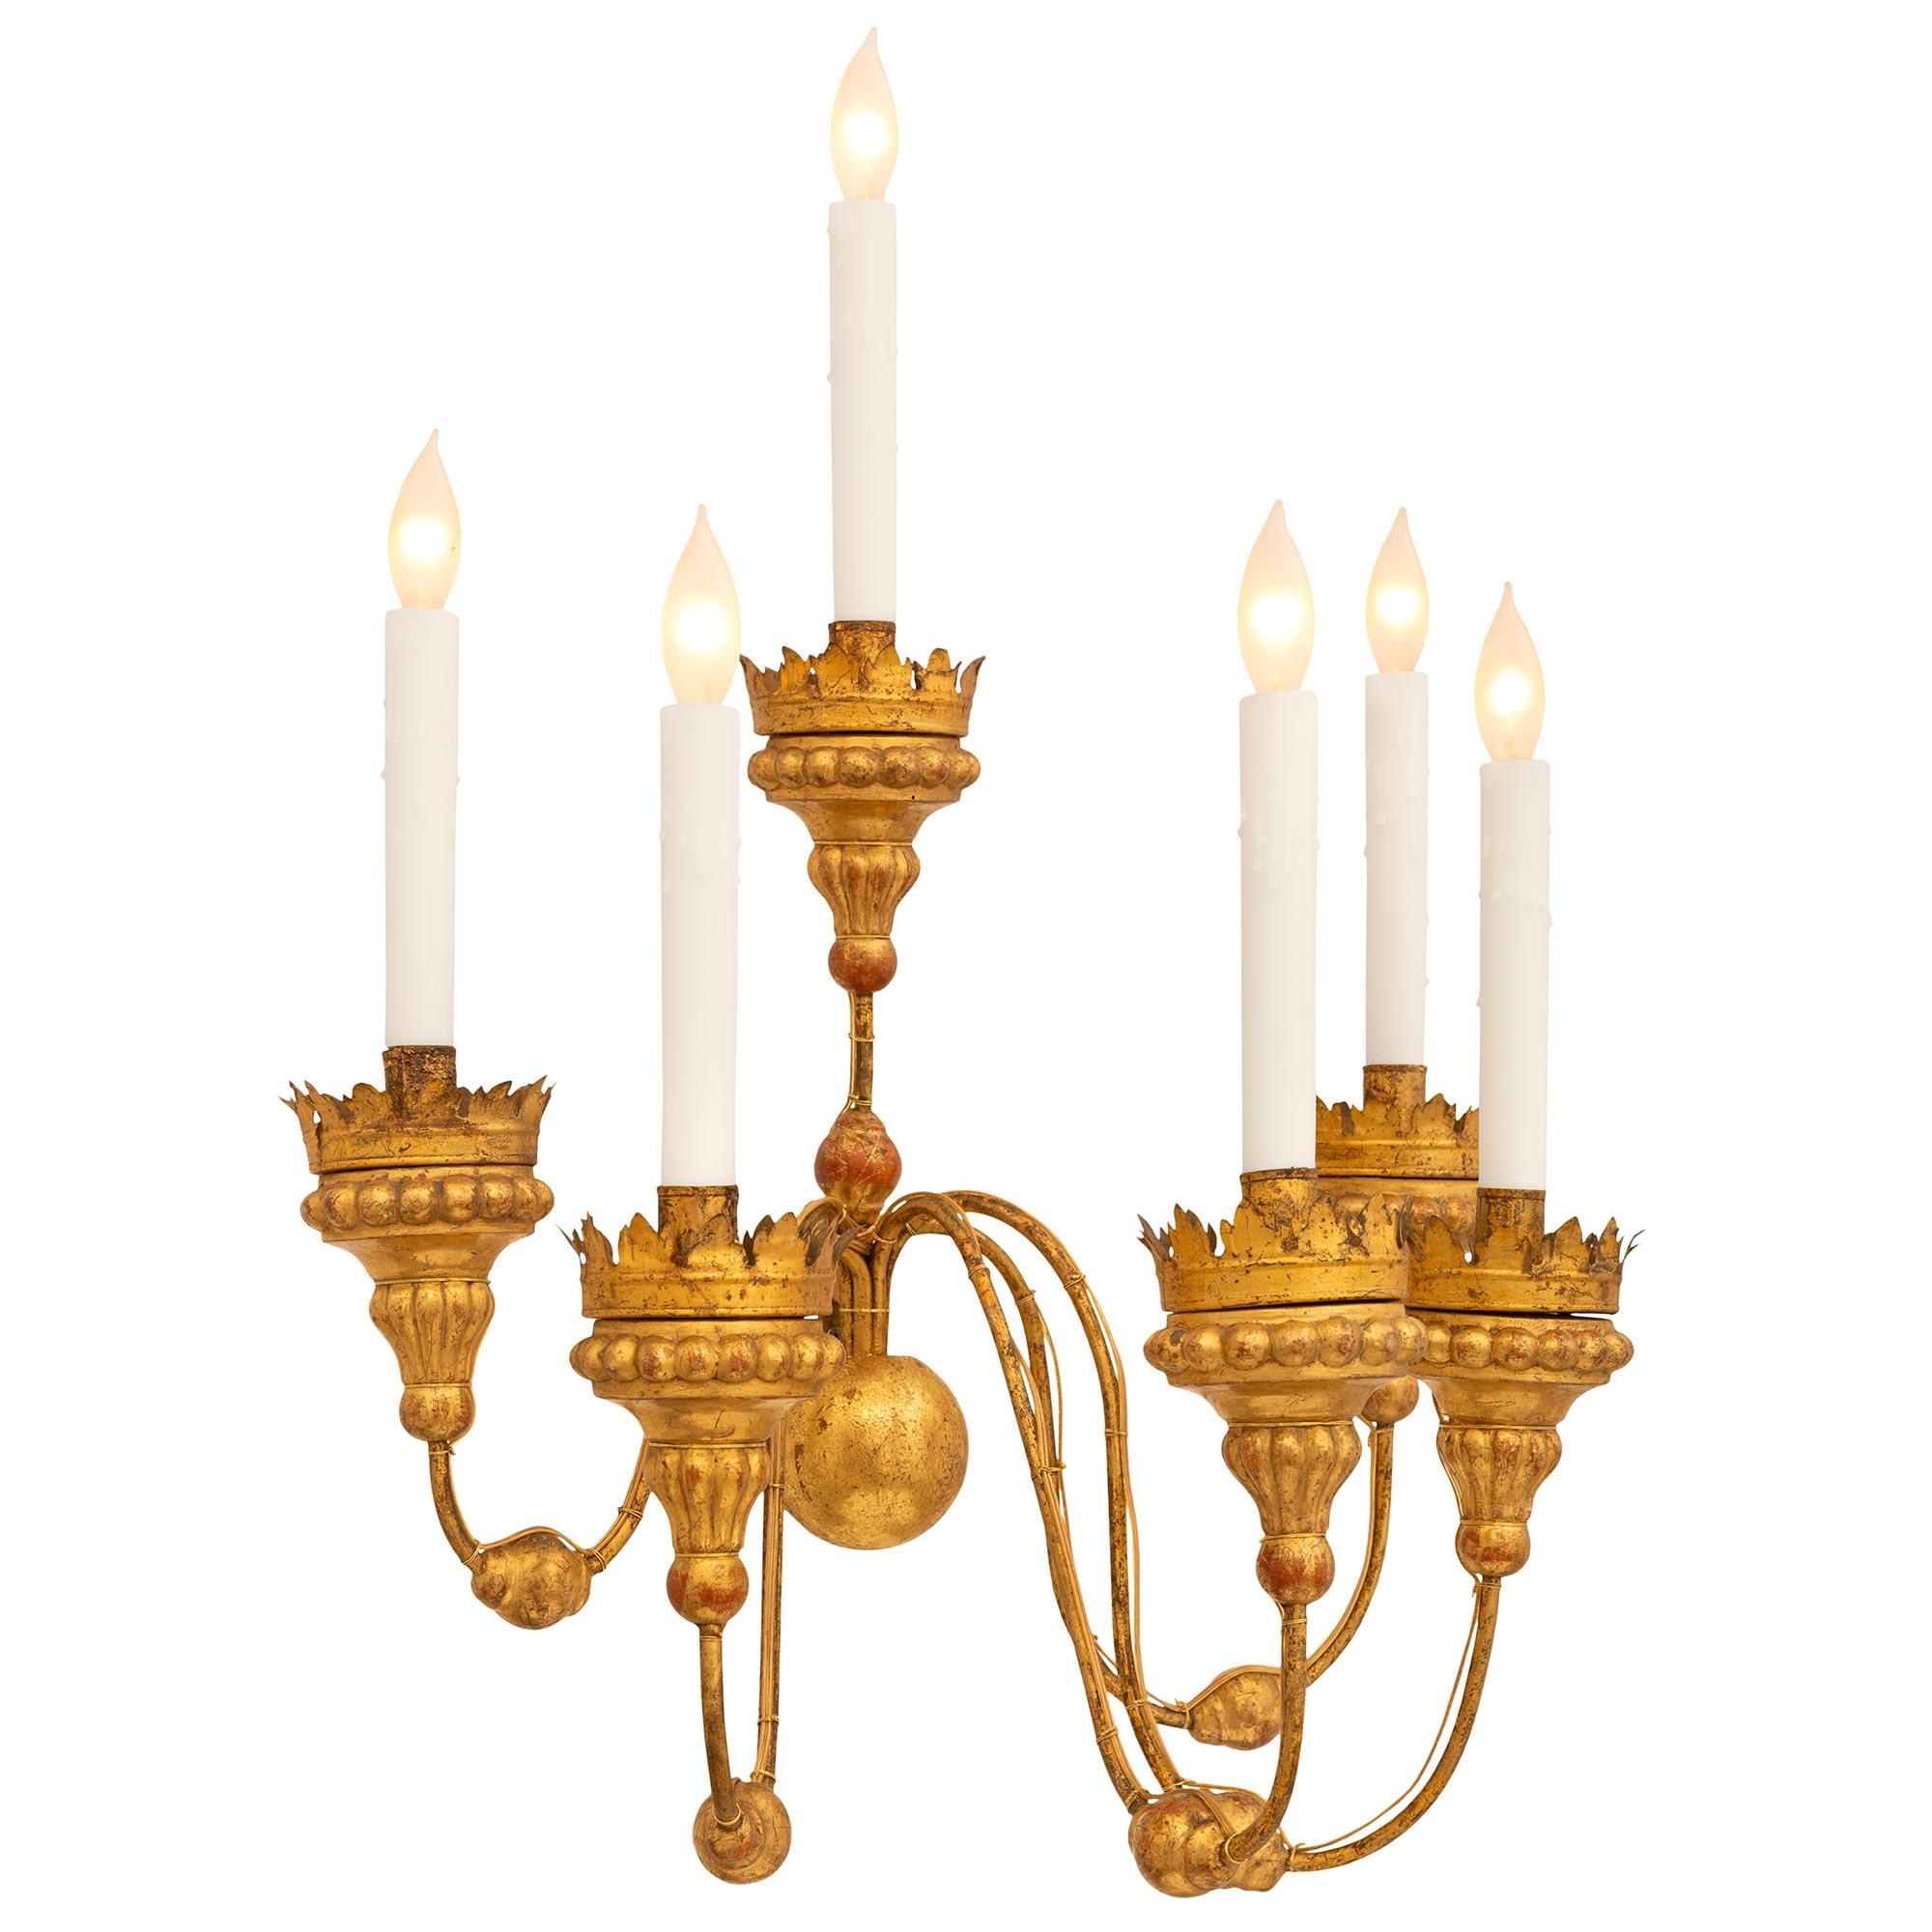 A beautiful pair of Italian 19th century Louis XVI st. Gilt Metal and Giltwood sconces. Each decorative six arm six light sconce is centered by a Giltwood sphere which connects the six 'S' scrolled arms. Each fine round arm contains a circular